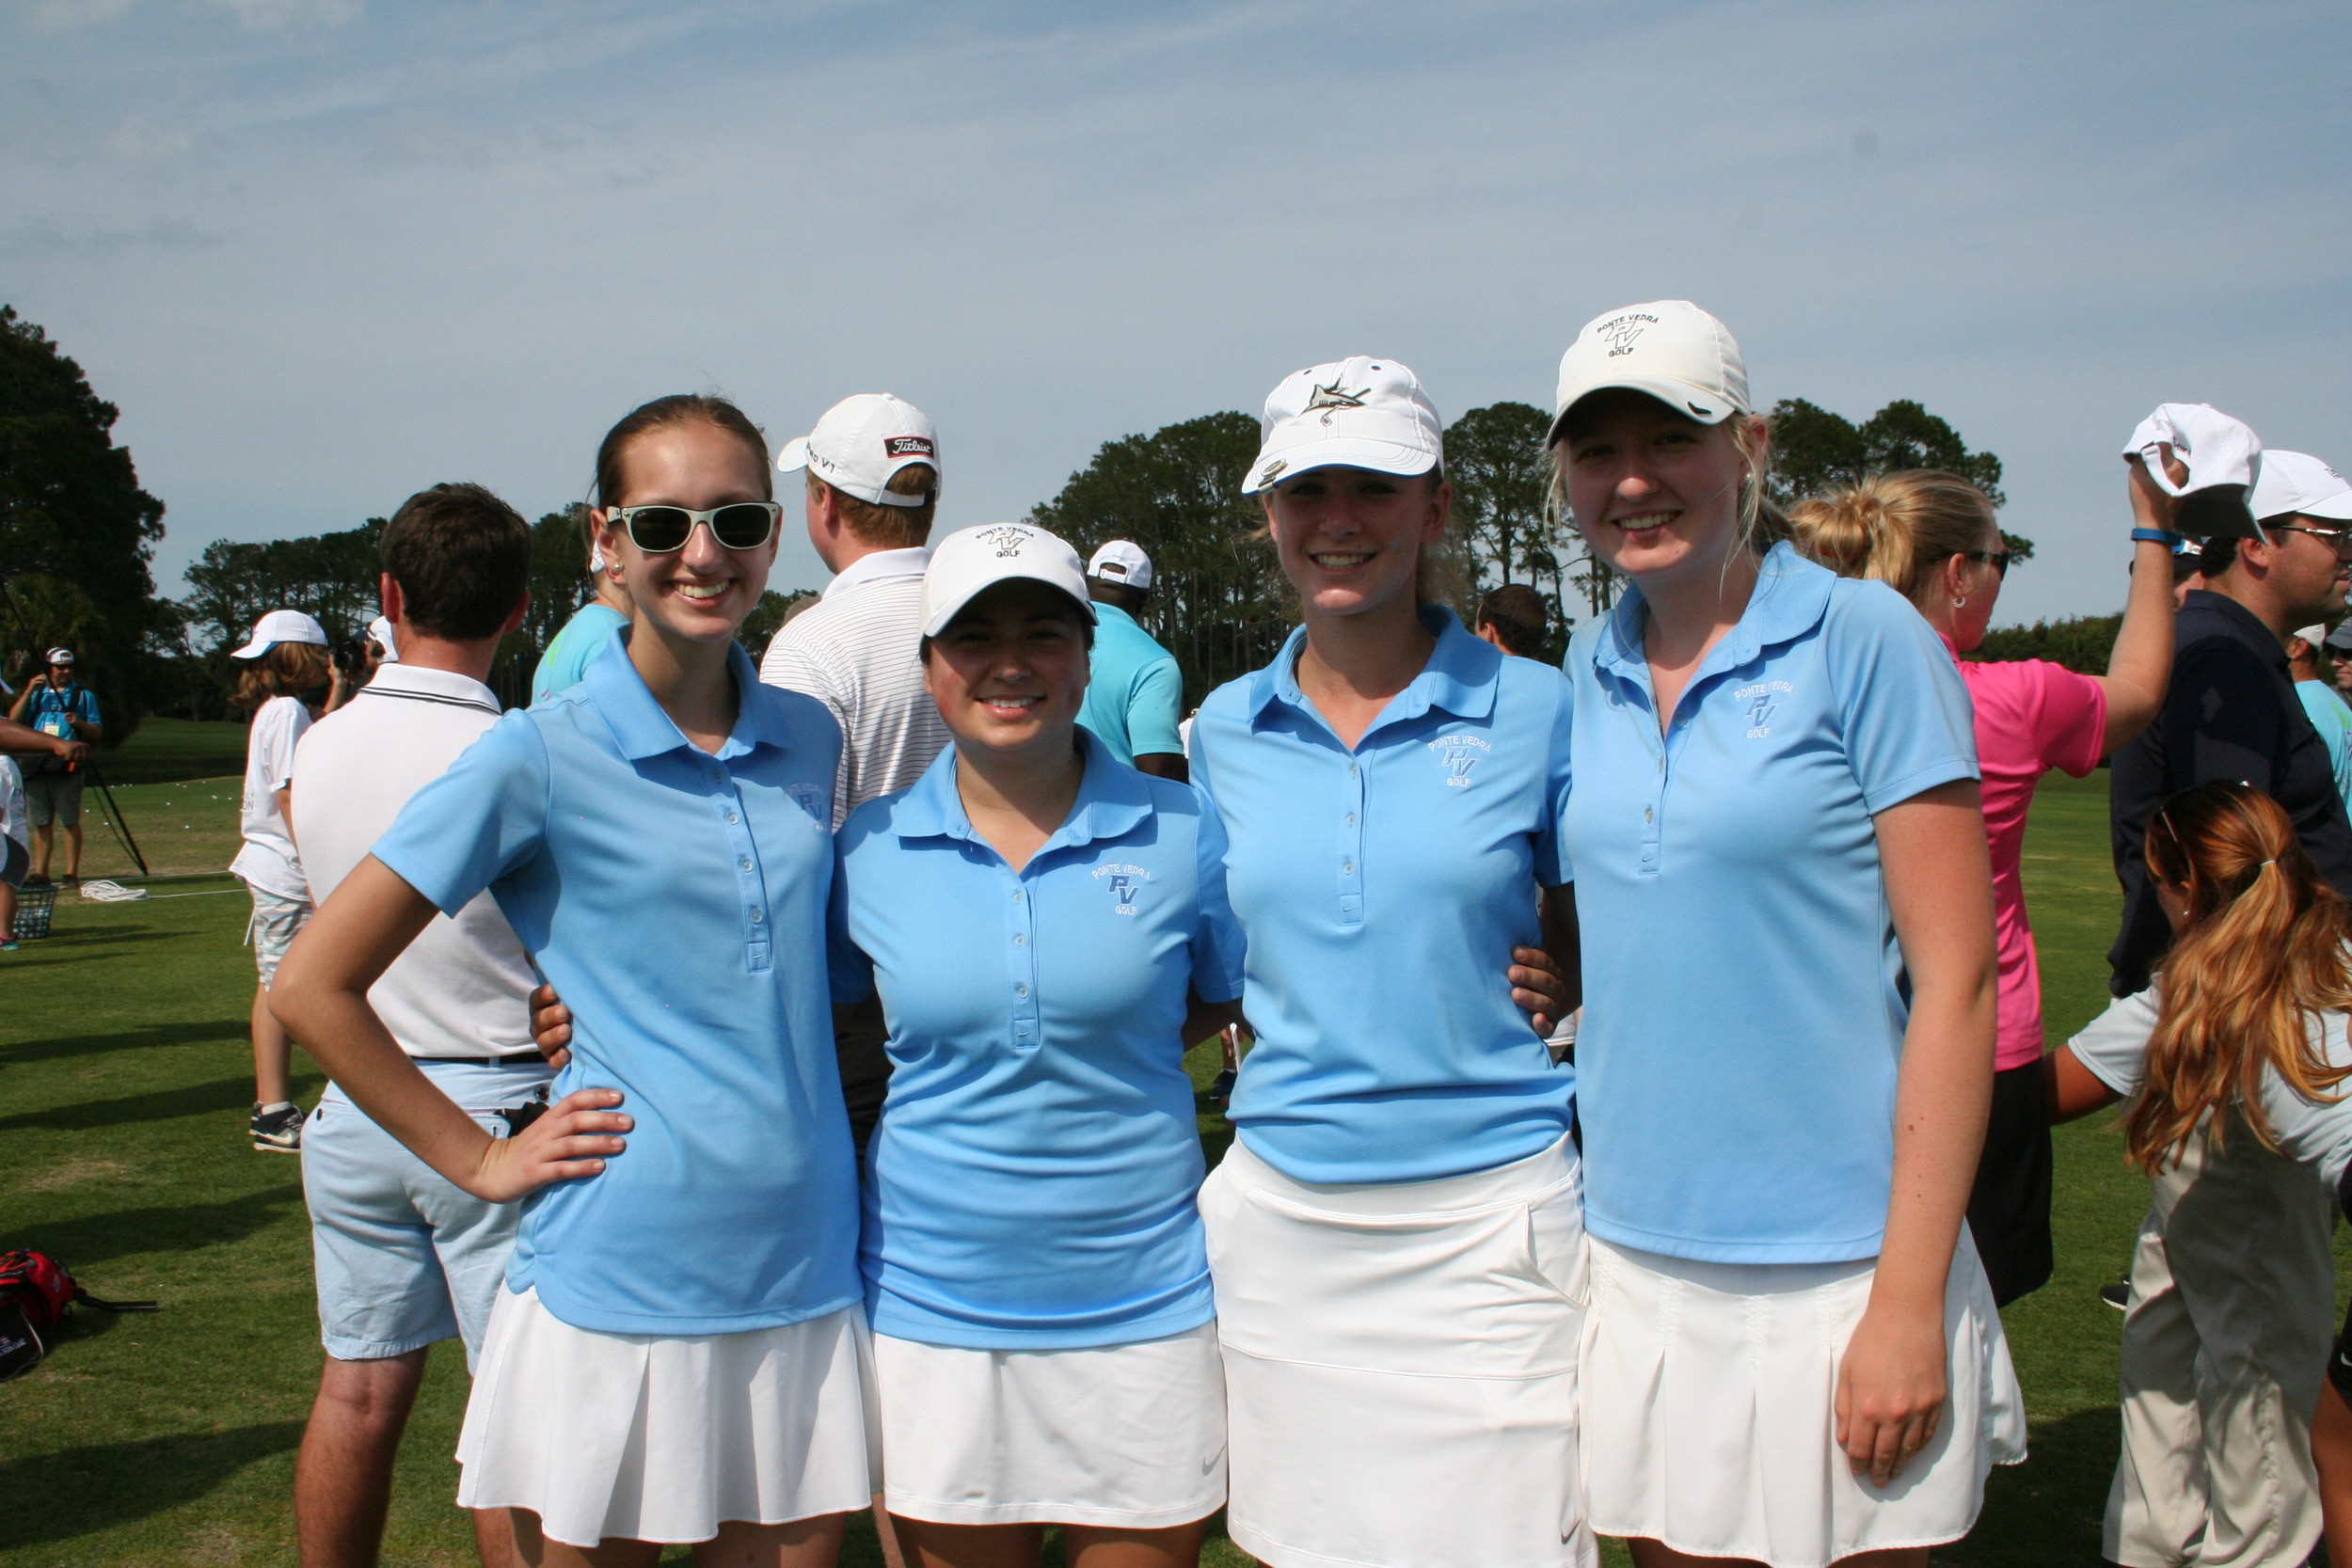 Event volunteers and members of the Ponte Vedra High School Lady Sharks Golf Team Julie Snow, Gabby Abbosh, Kendall Quinlau and Sophie Membrino.